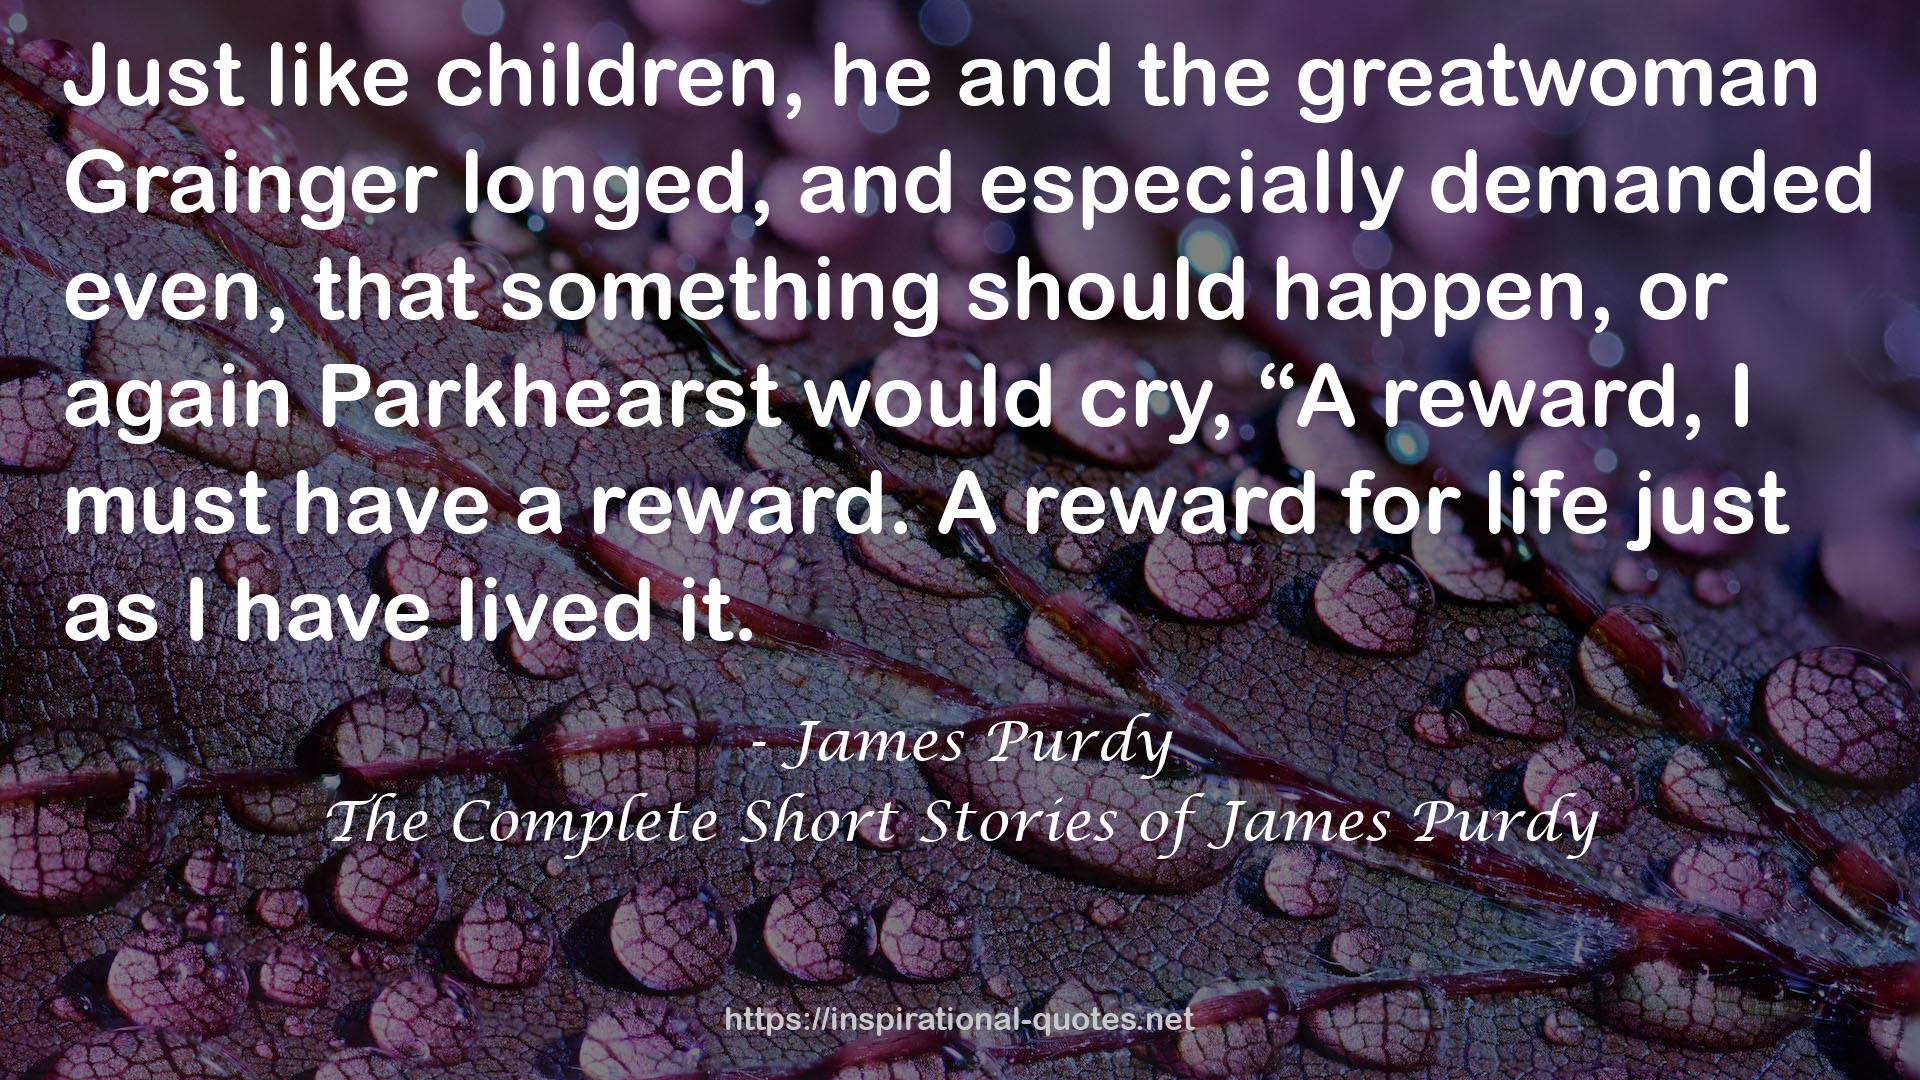 The Complete Short Stories of James Purdy QUOTES